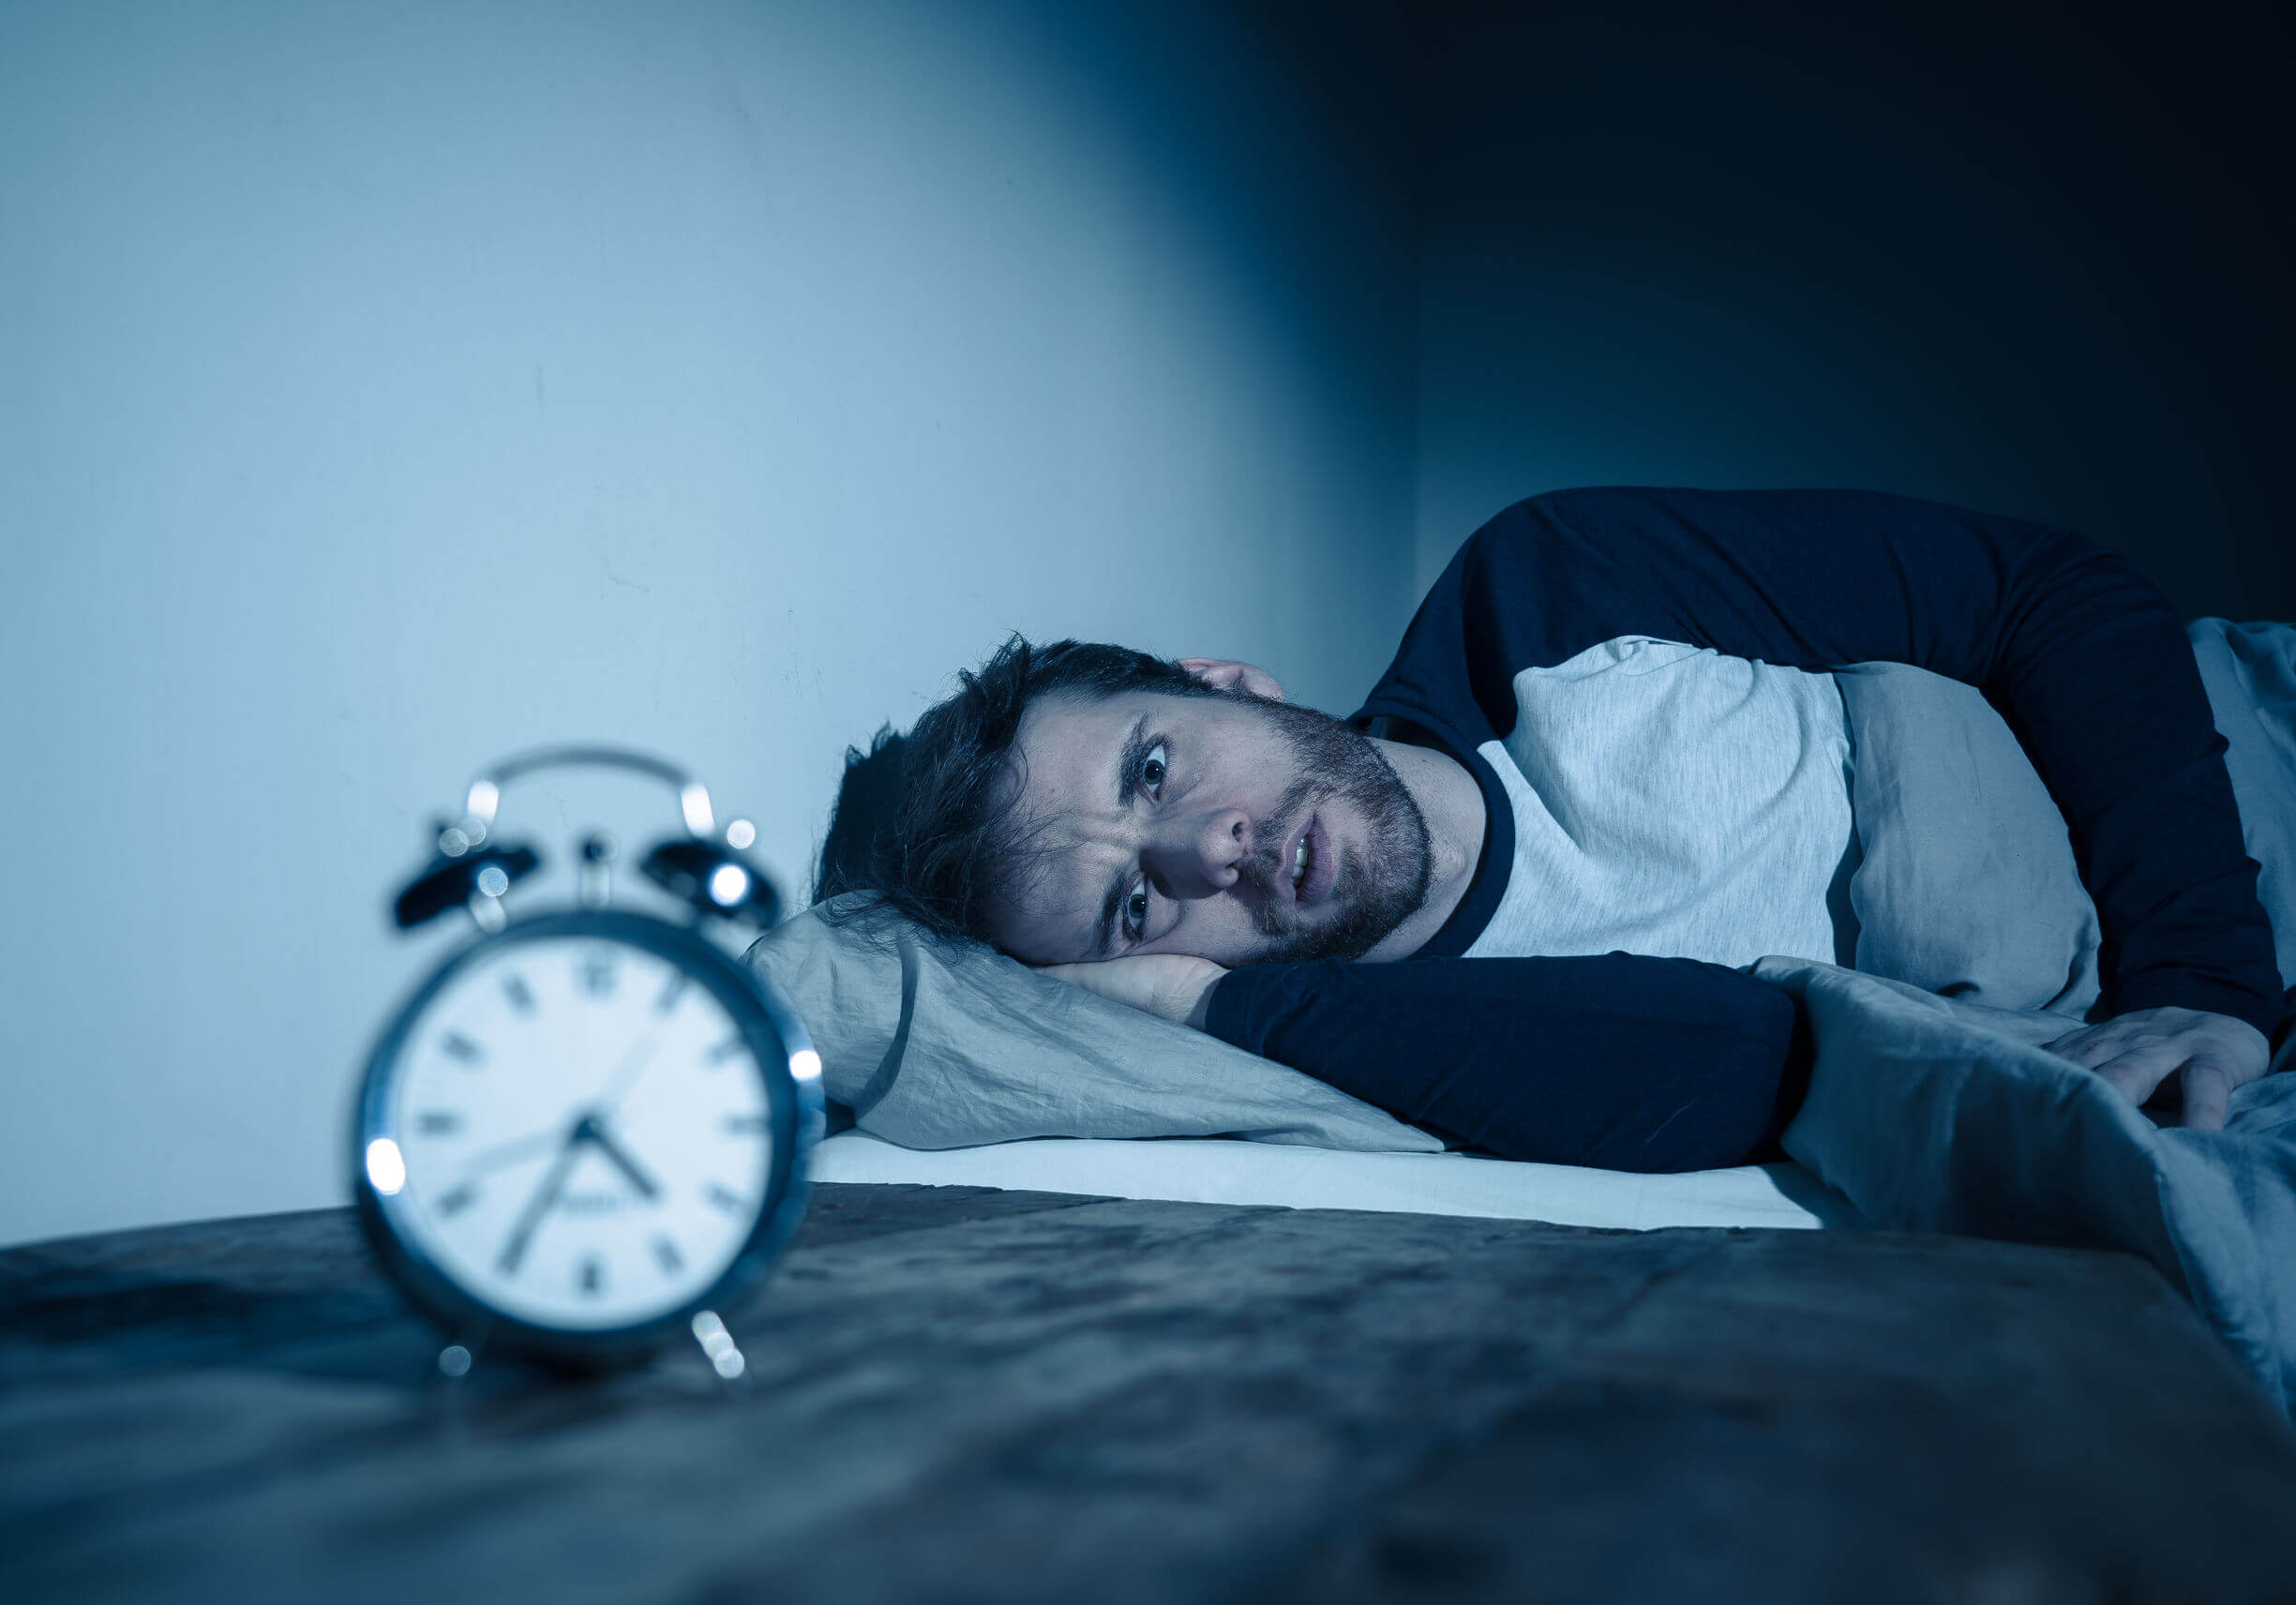 Insomnia medications can improve quality of life.